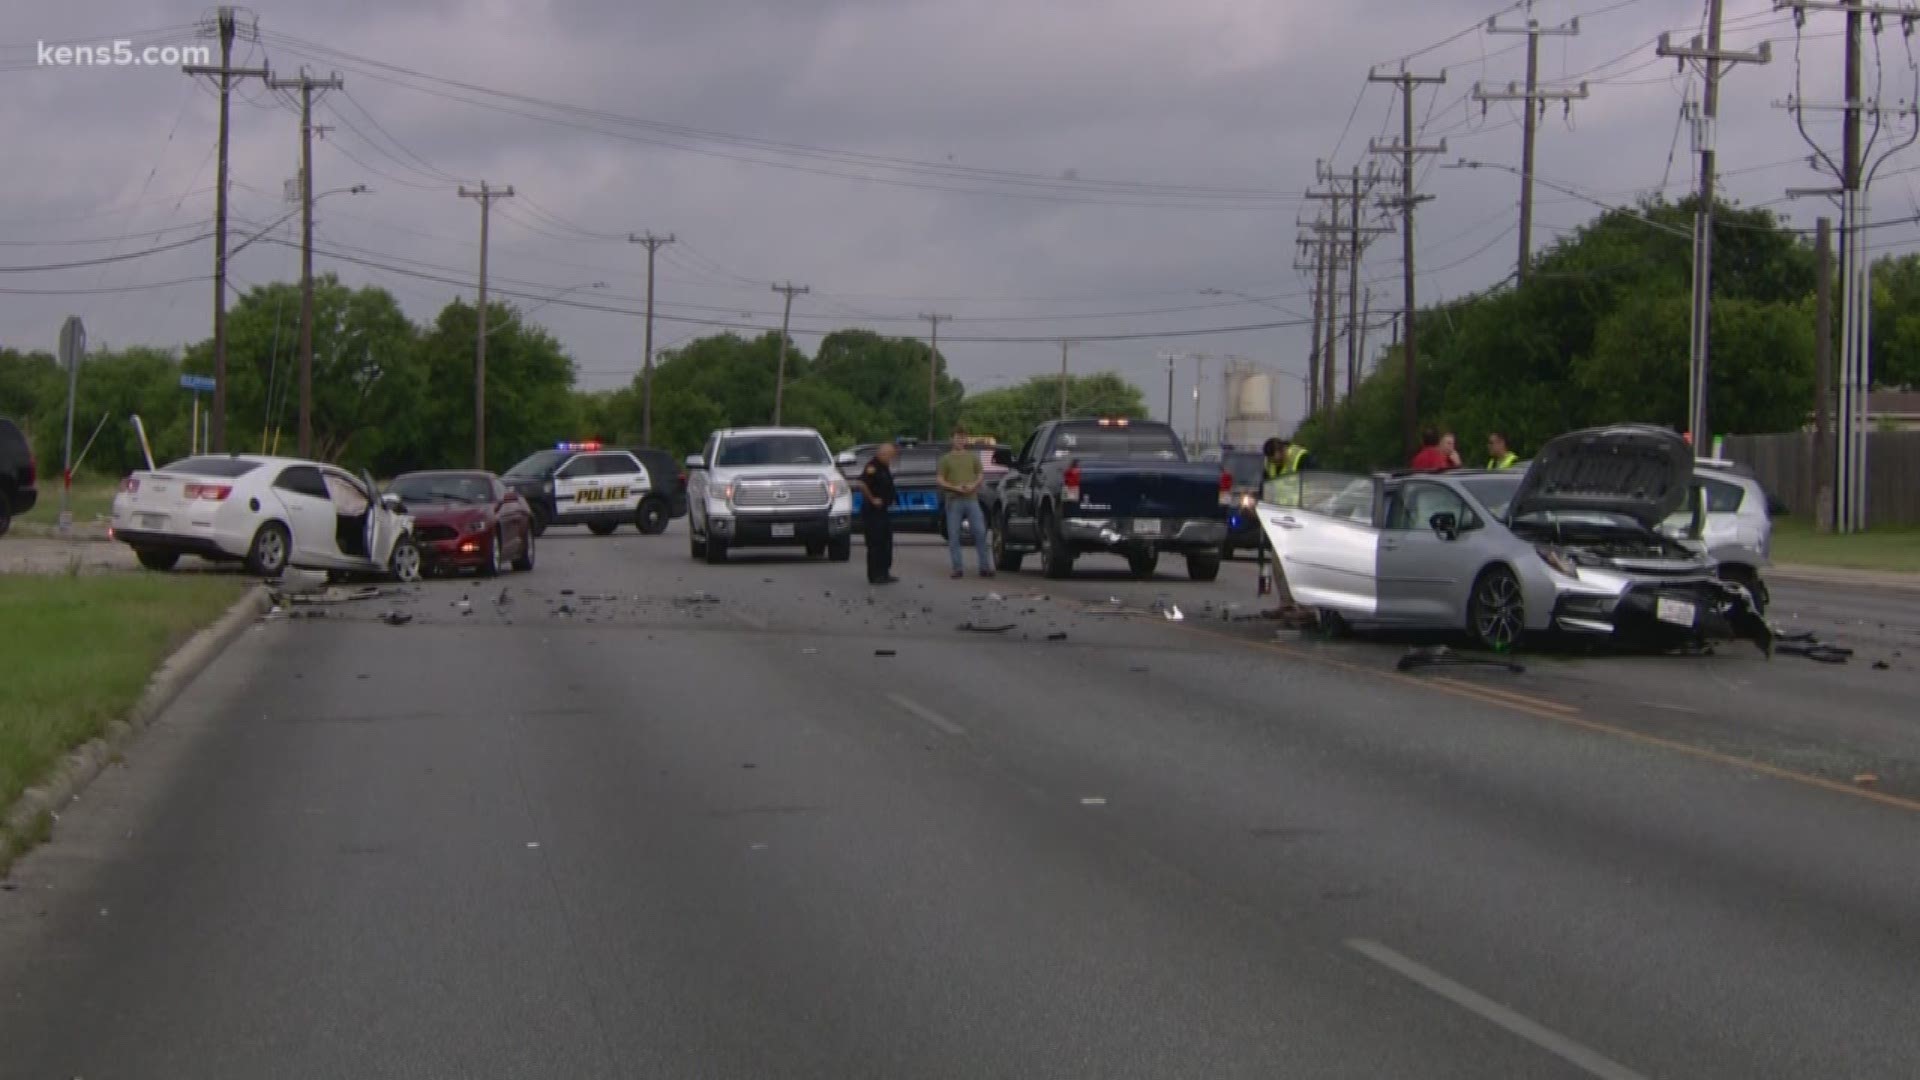 A police chase with a stolen car ended tragically on the northwest side.